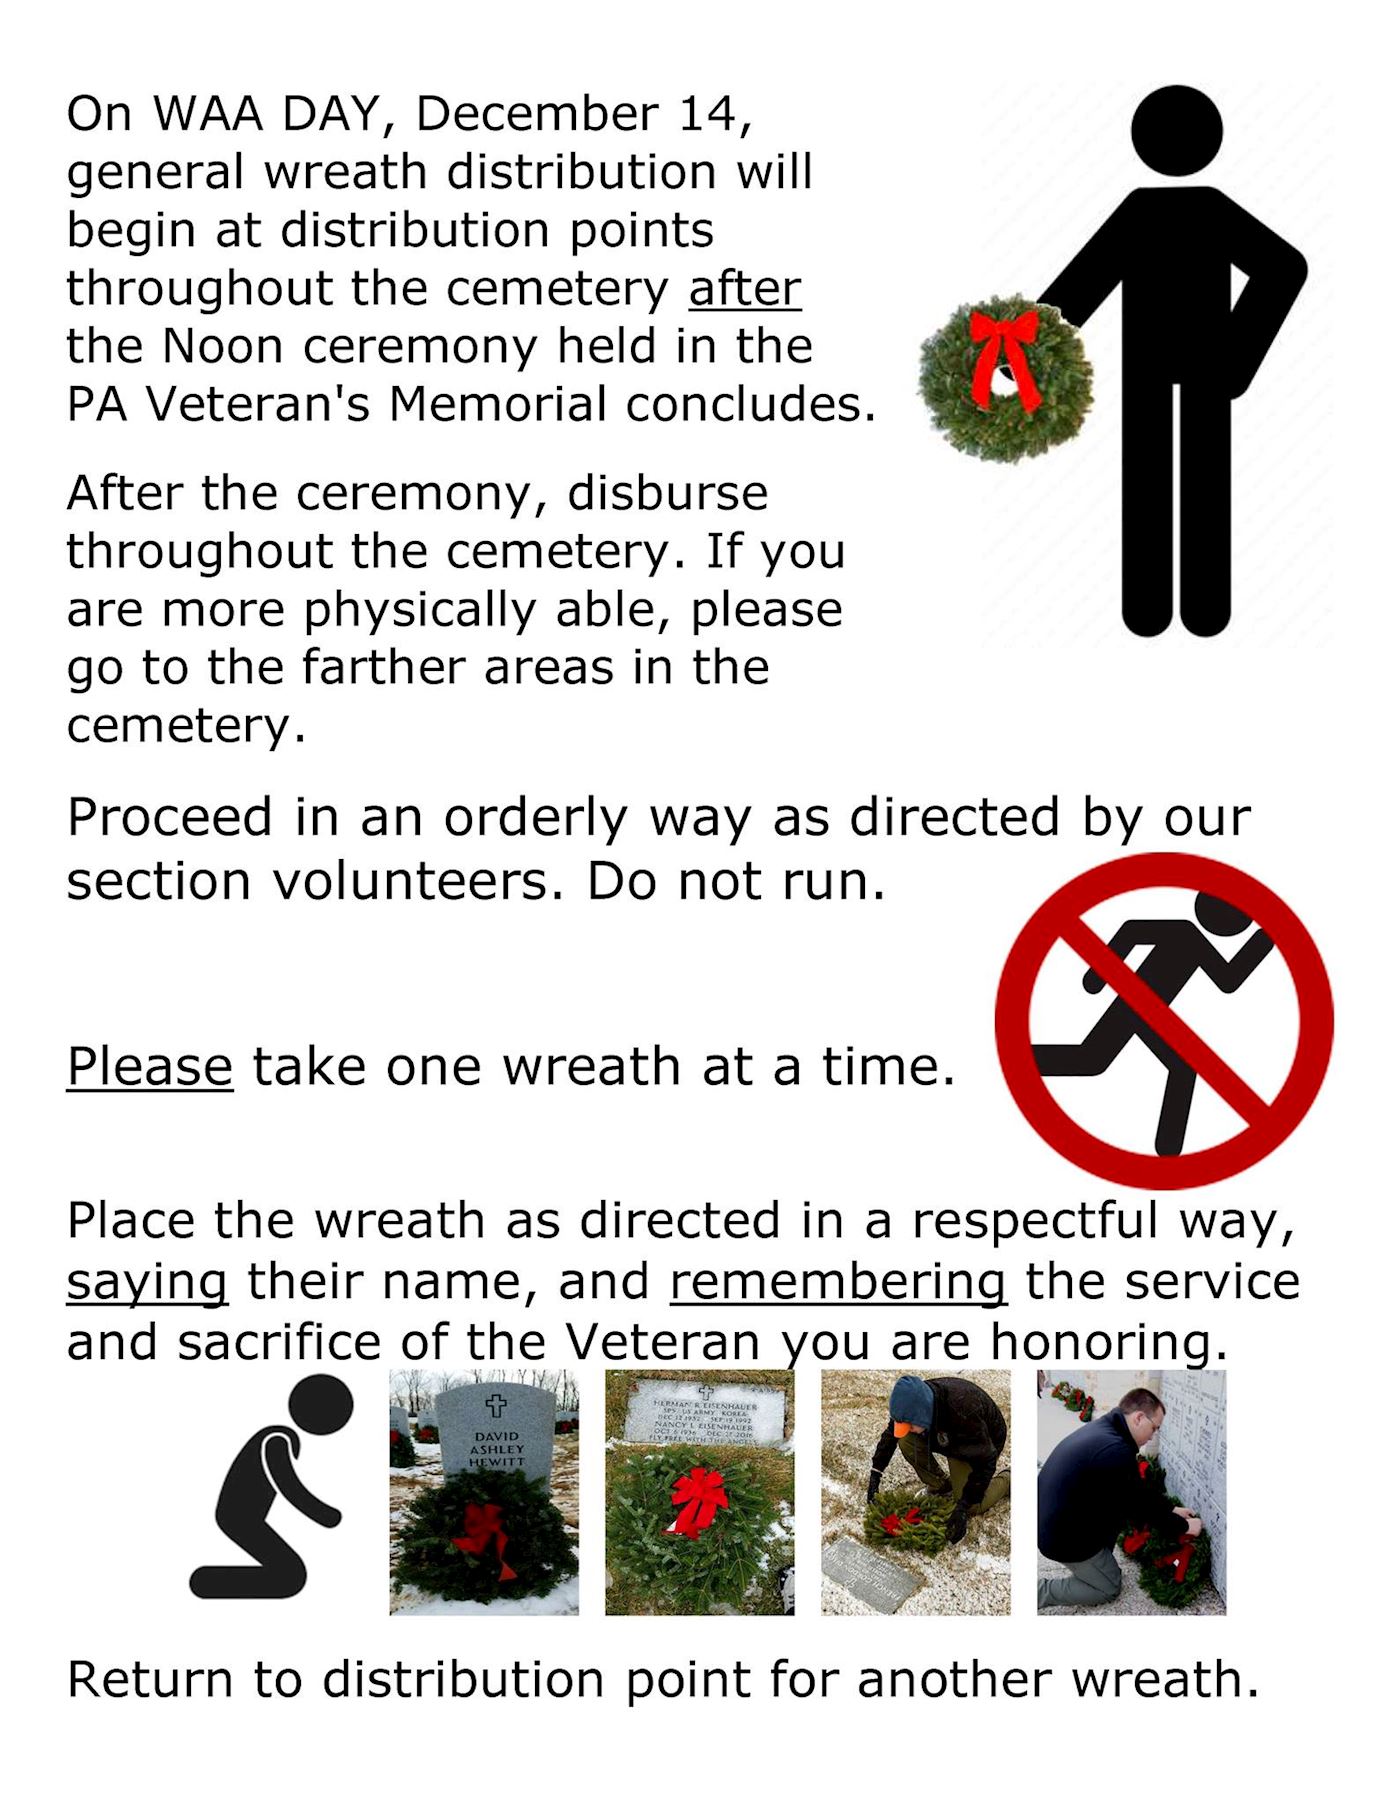 PLEASE REVIEW THE PROCESS AND TEACH YOUNG CHILDREN THE PROPER WAY TO PLACE A WREATH AFTER SAYING THE NAME AND PAYING TRIBUTE TO THE VETERAN'S SERVICE AND SACRIFICE